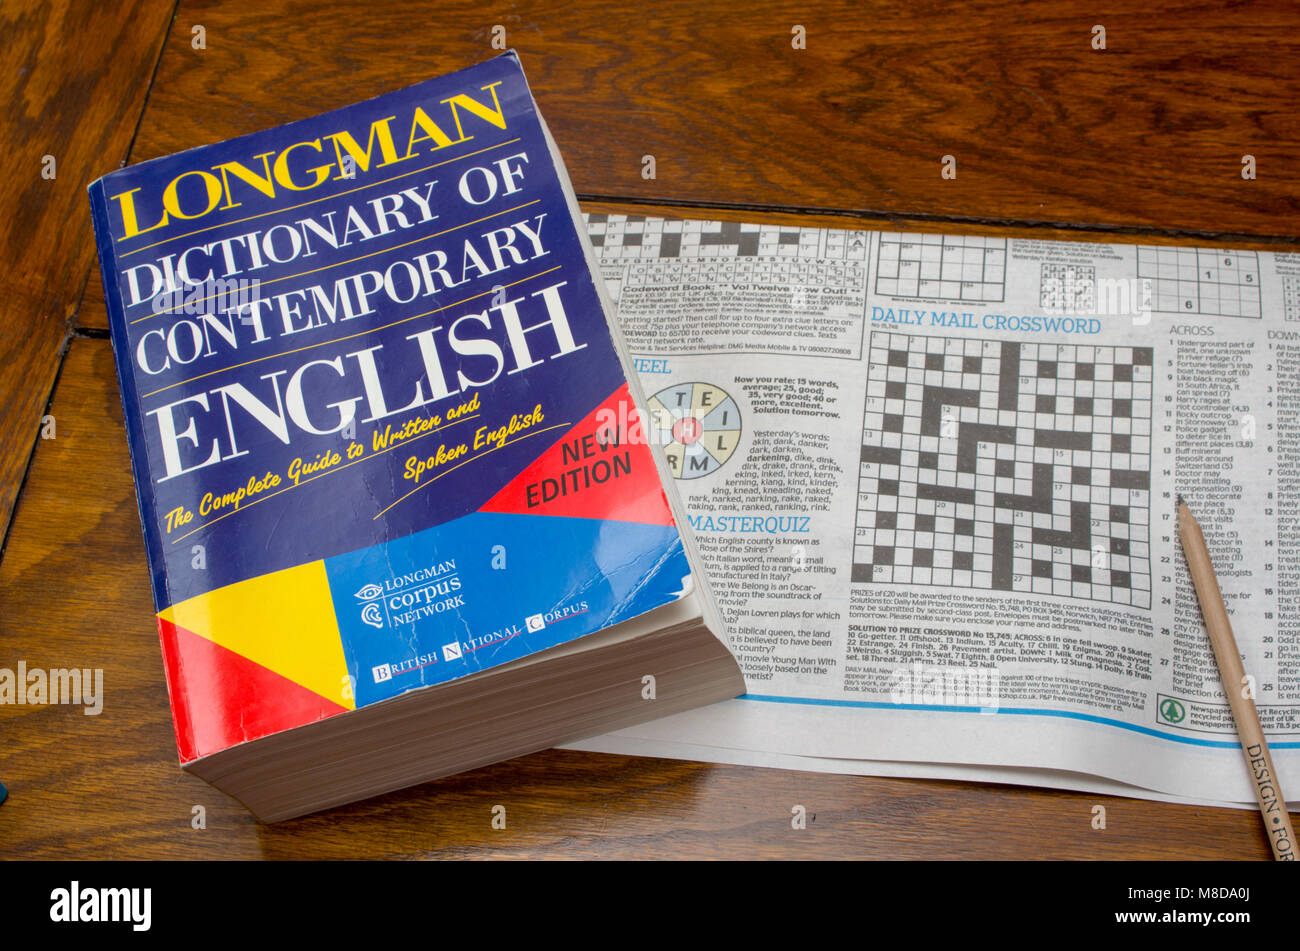 Longman Dictionary of Contemporary English with newspaper crossword puzzle and pencil Stock Photo